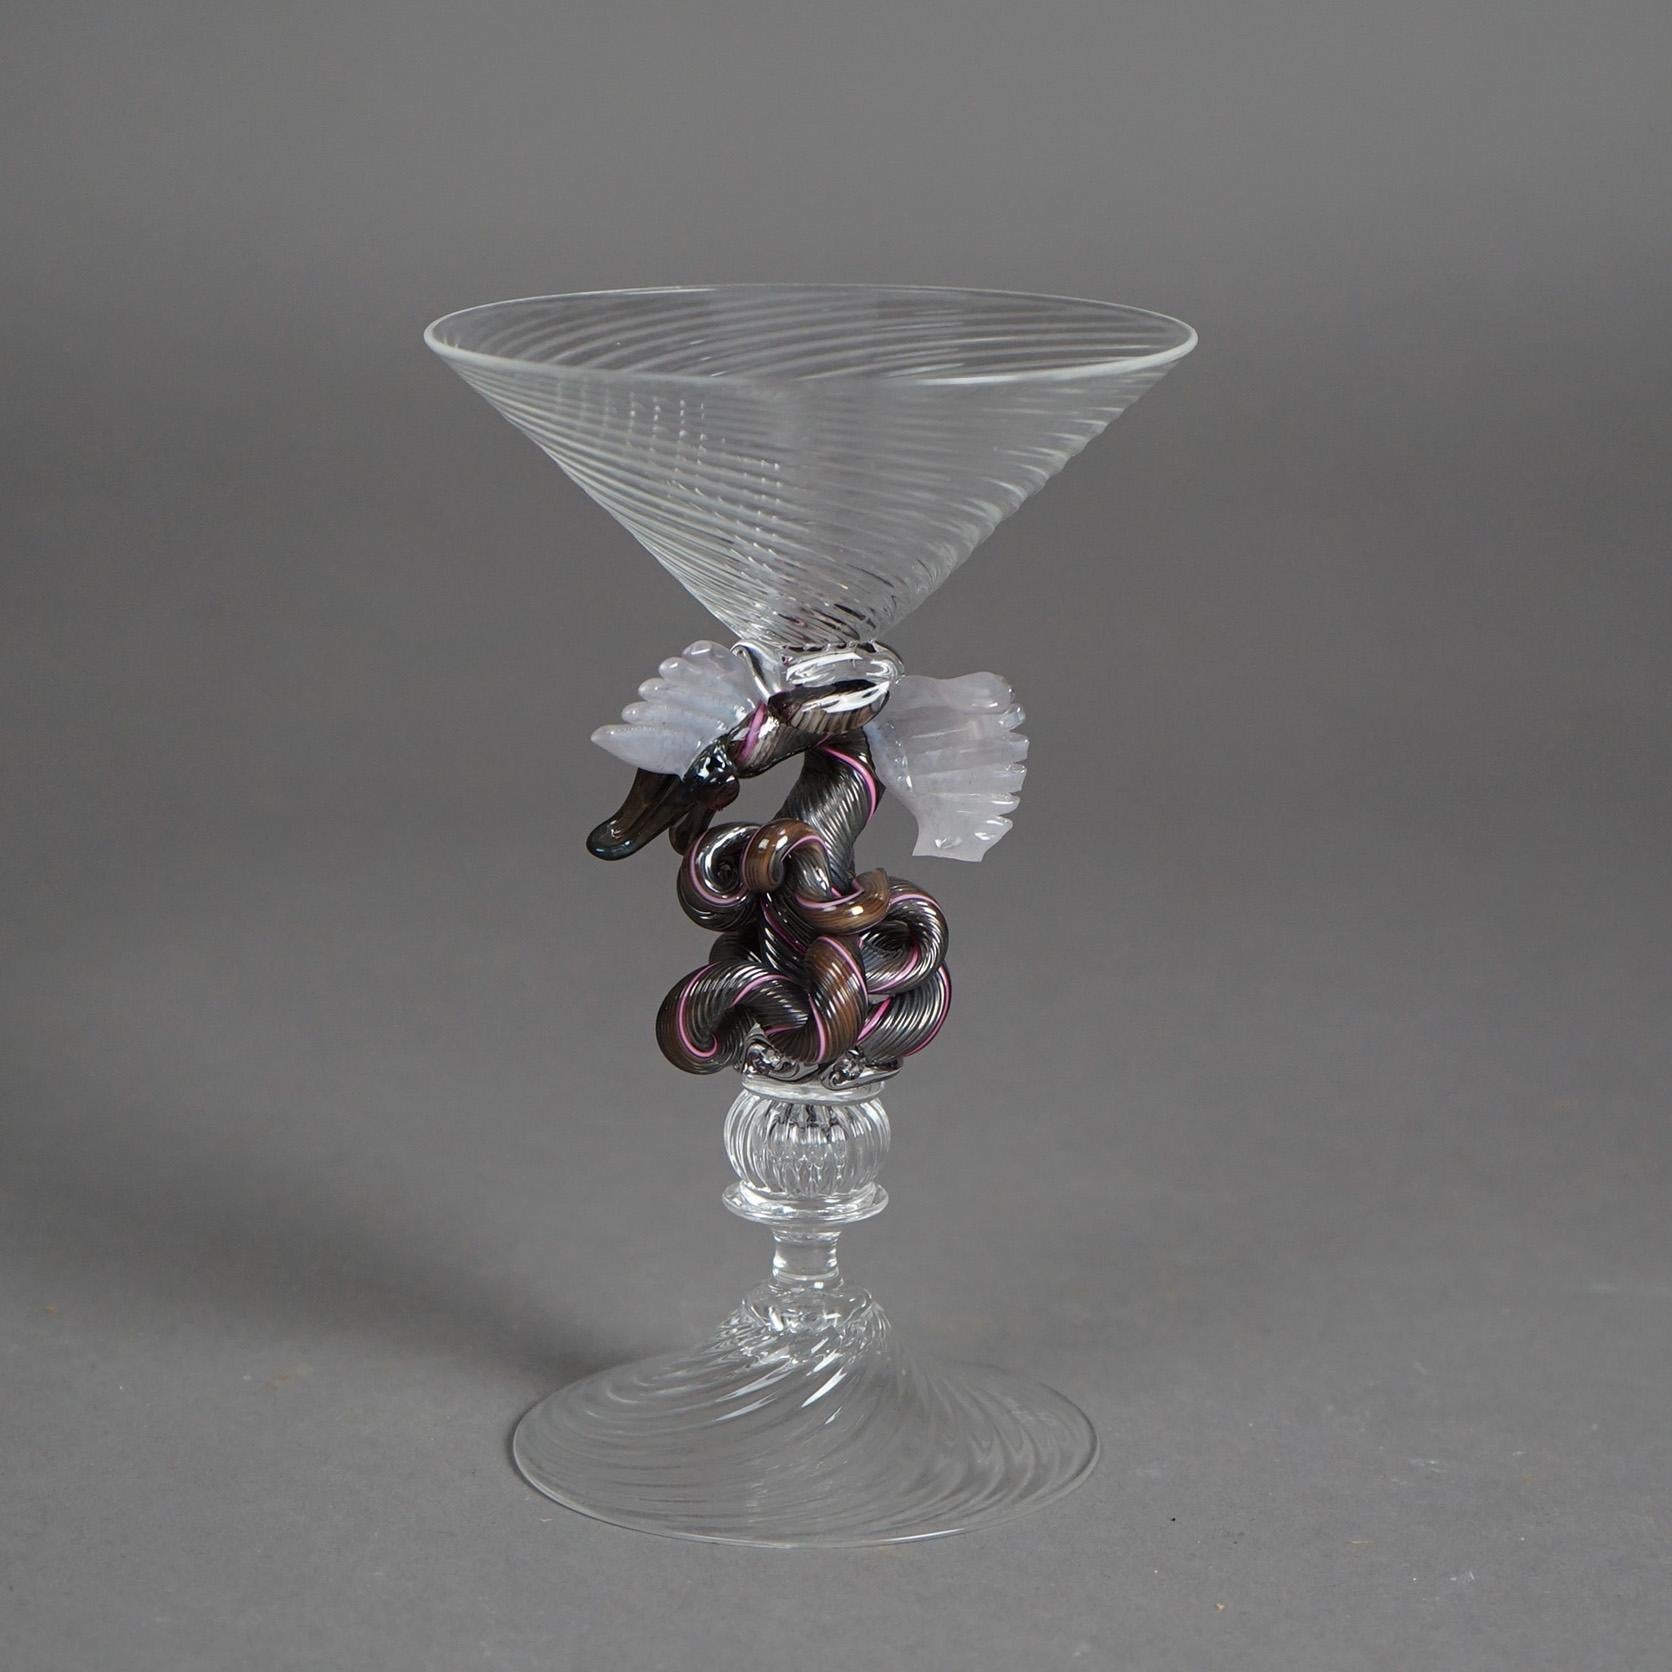 An antique figural Venetian style goblet by William Gudenrath offers art glass construction with flared cup over dragon pedestal, artist signed on base, c1920

Measures - 6.75